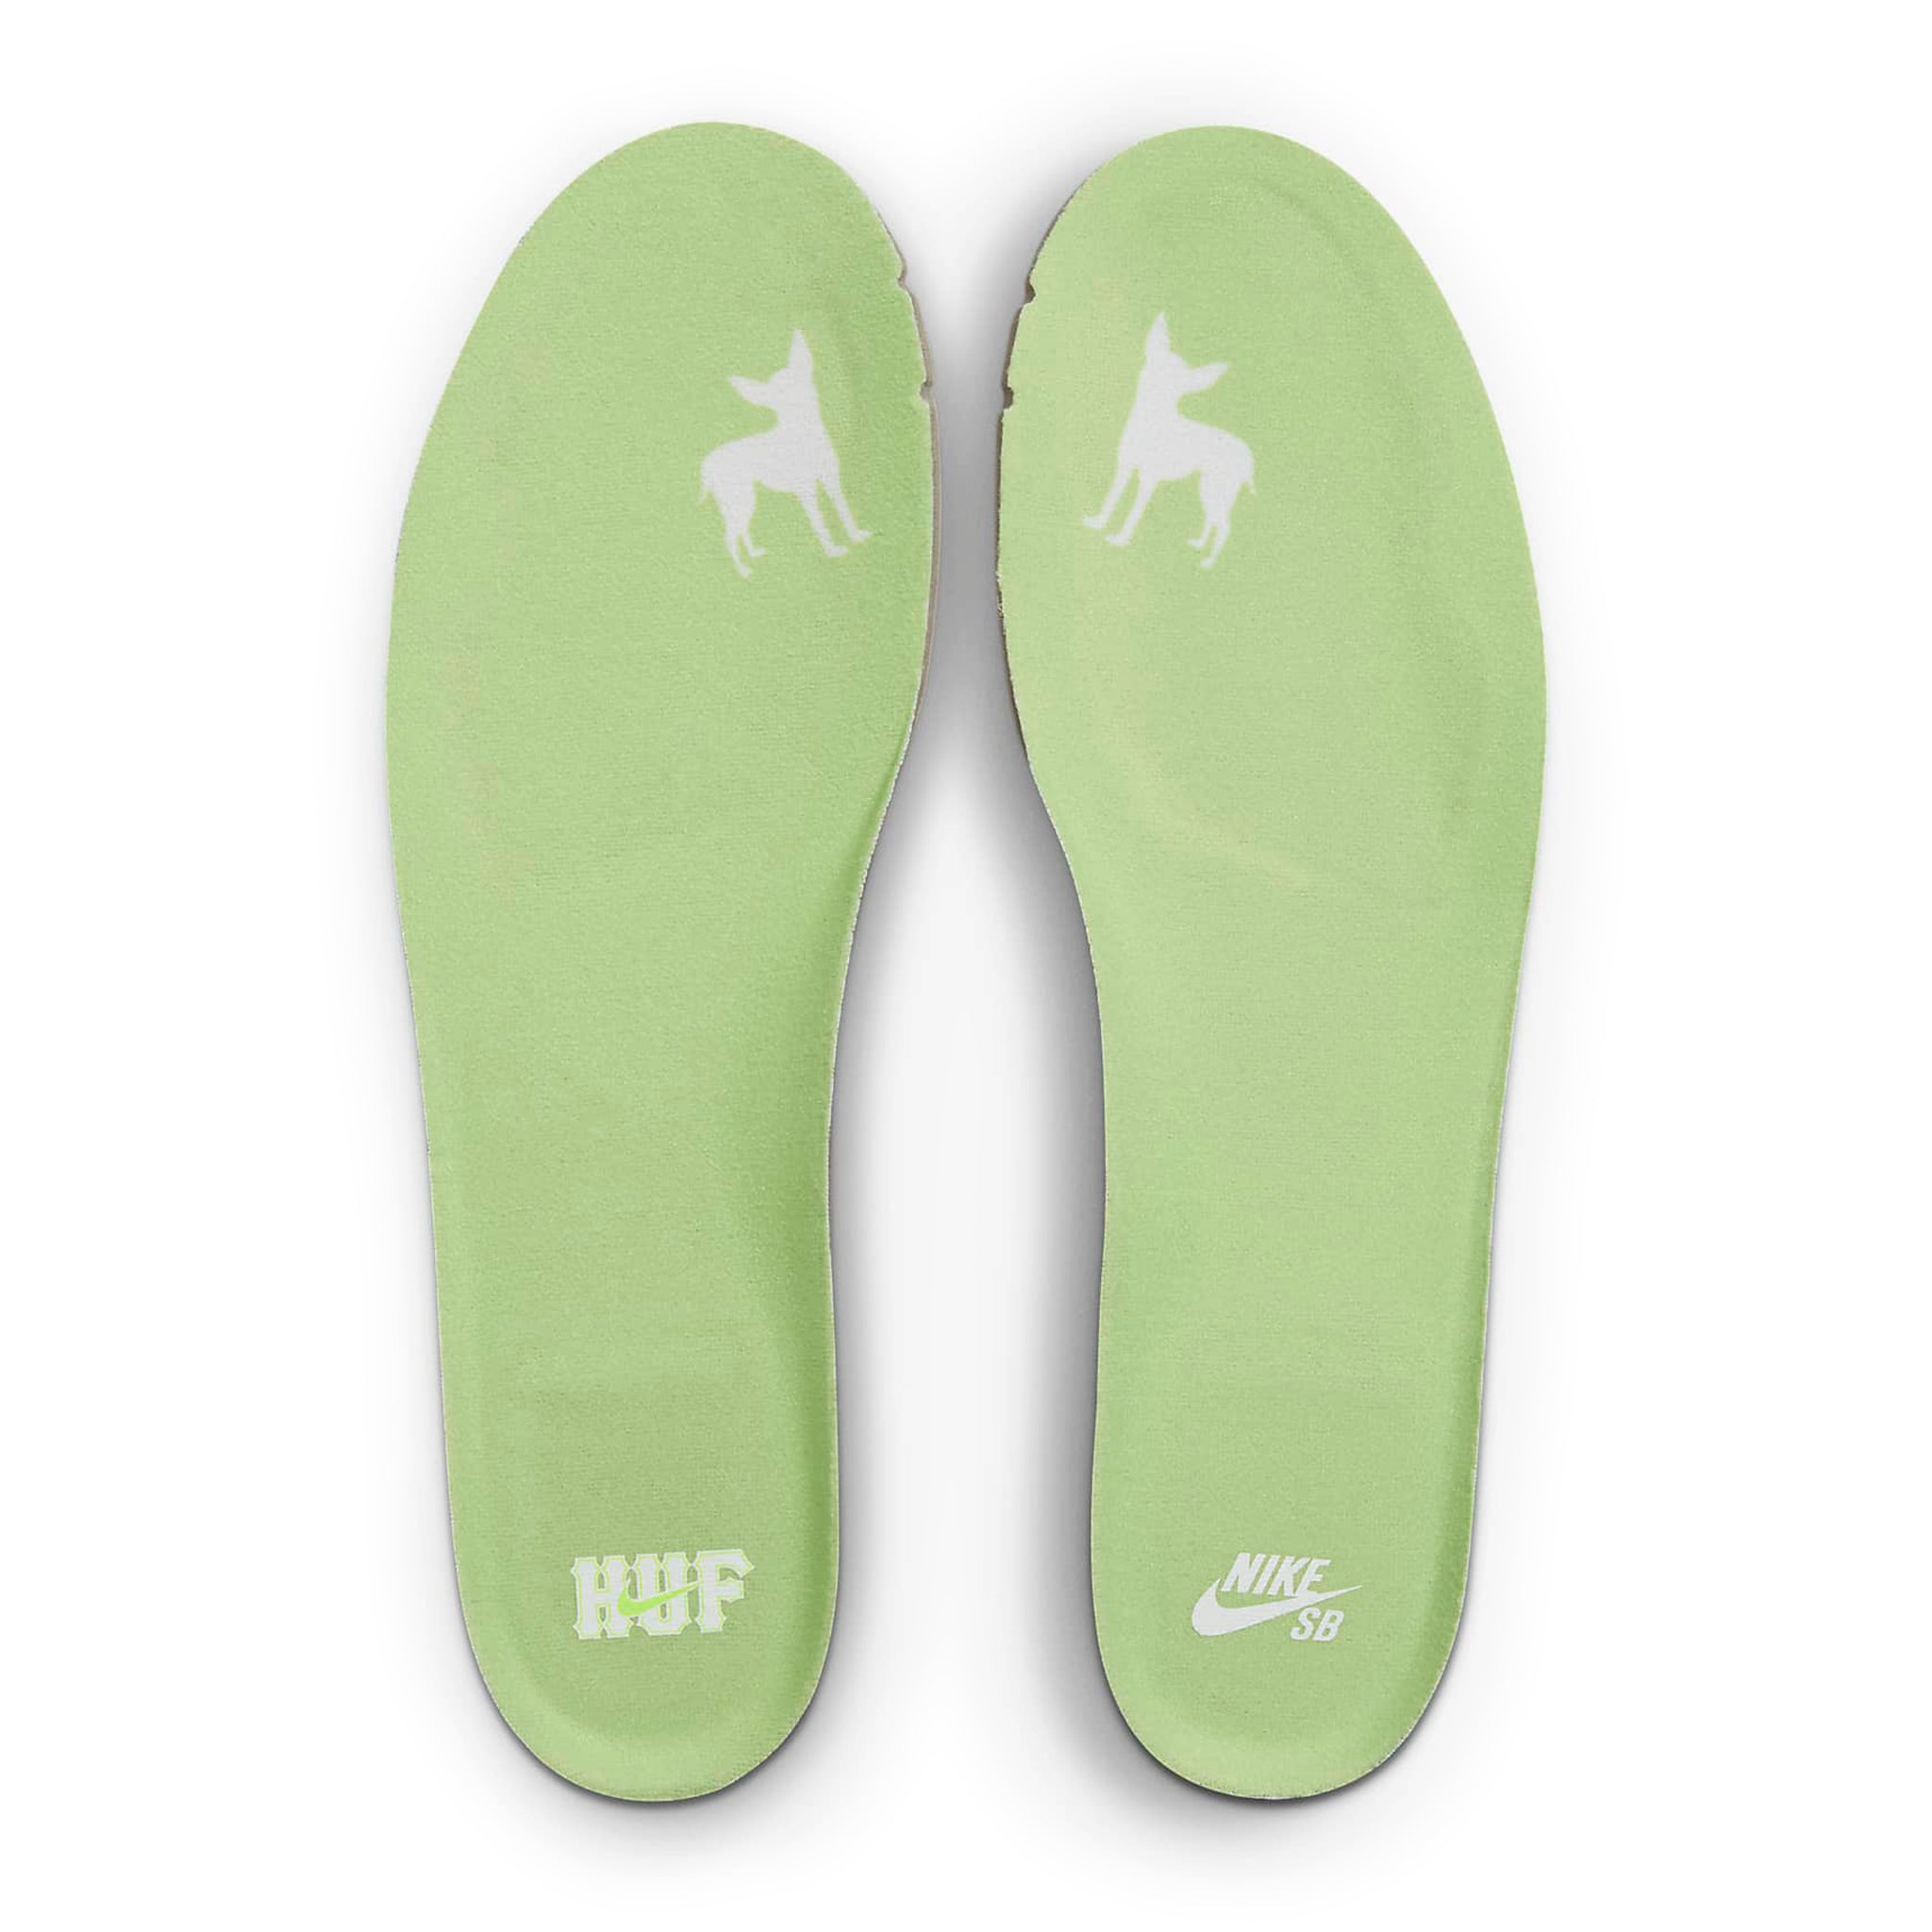 Insole view of Nike x HUF SB Dunk Low New York City FD8775-100